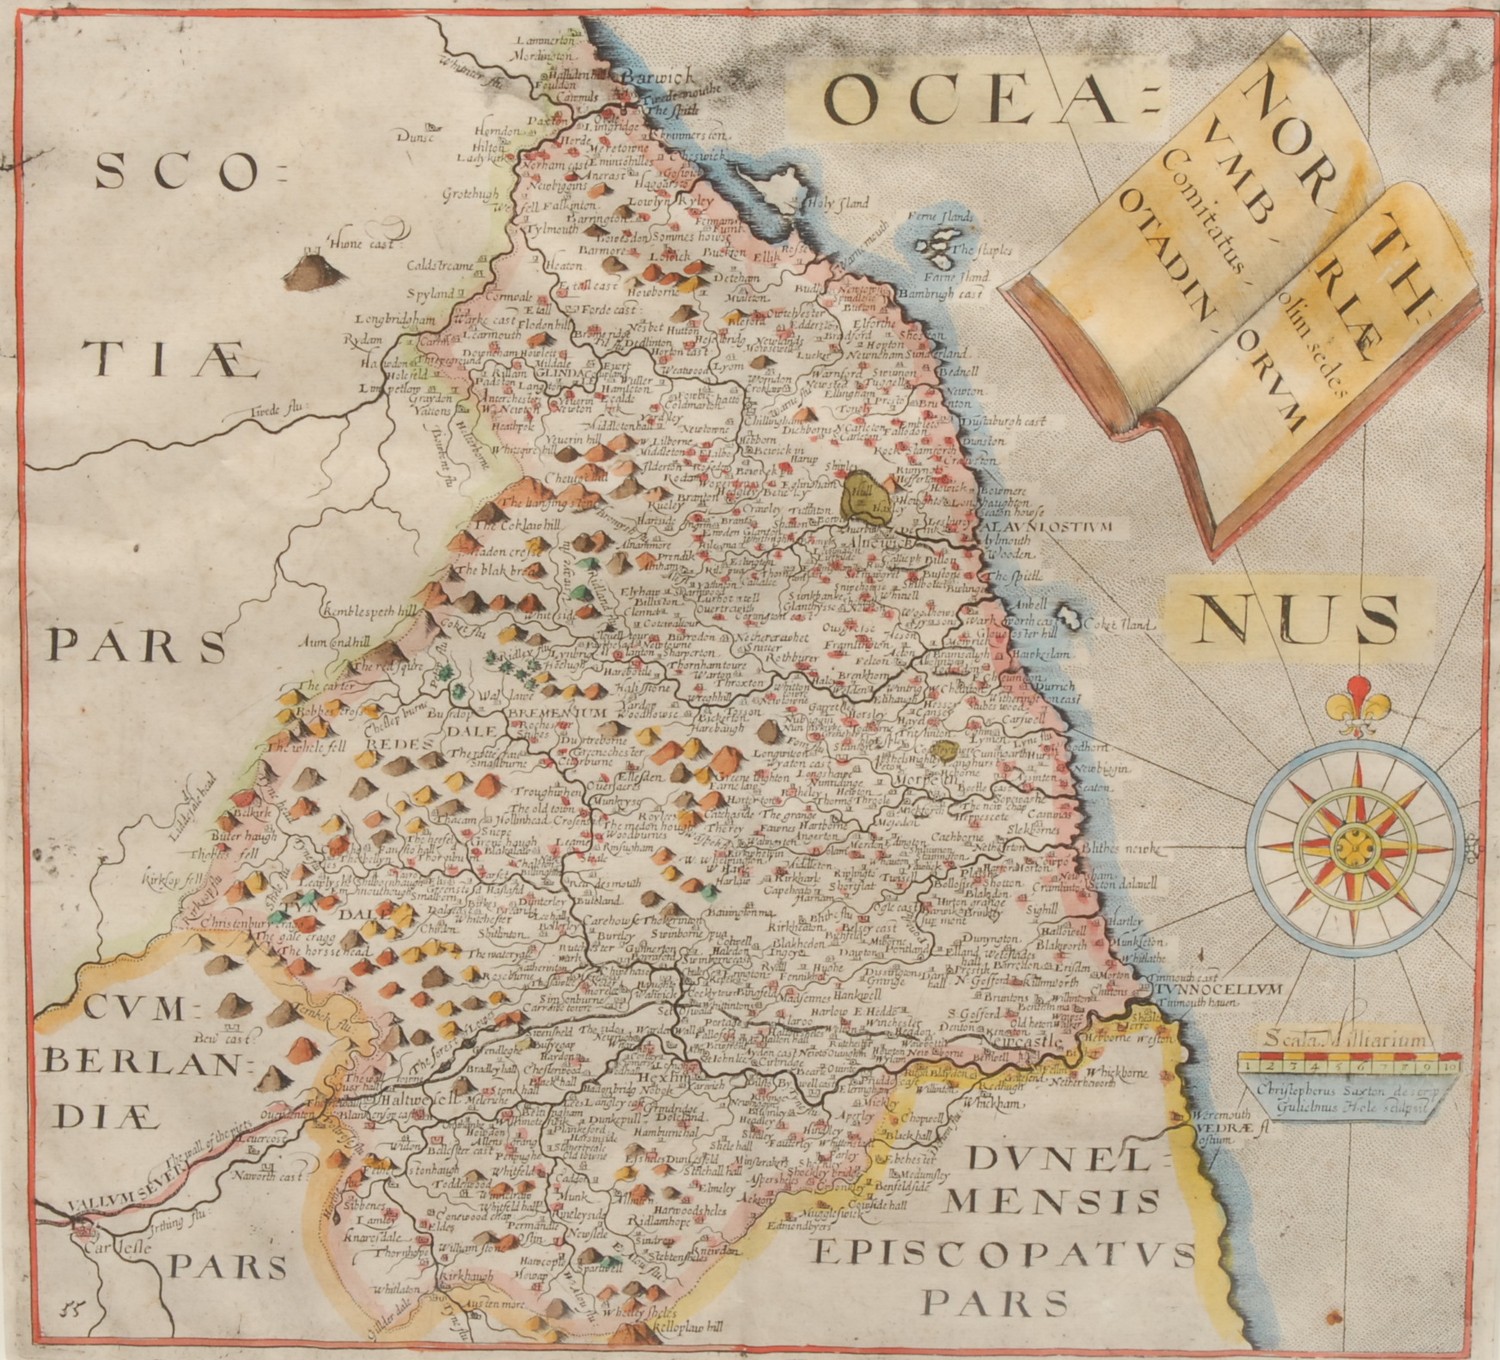 William Hole (d. 1624), after Christopher Saxton (c. 1540 ? c. 1610), a county map of